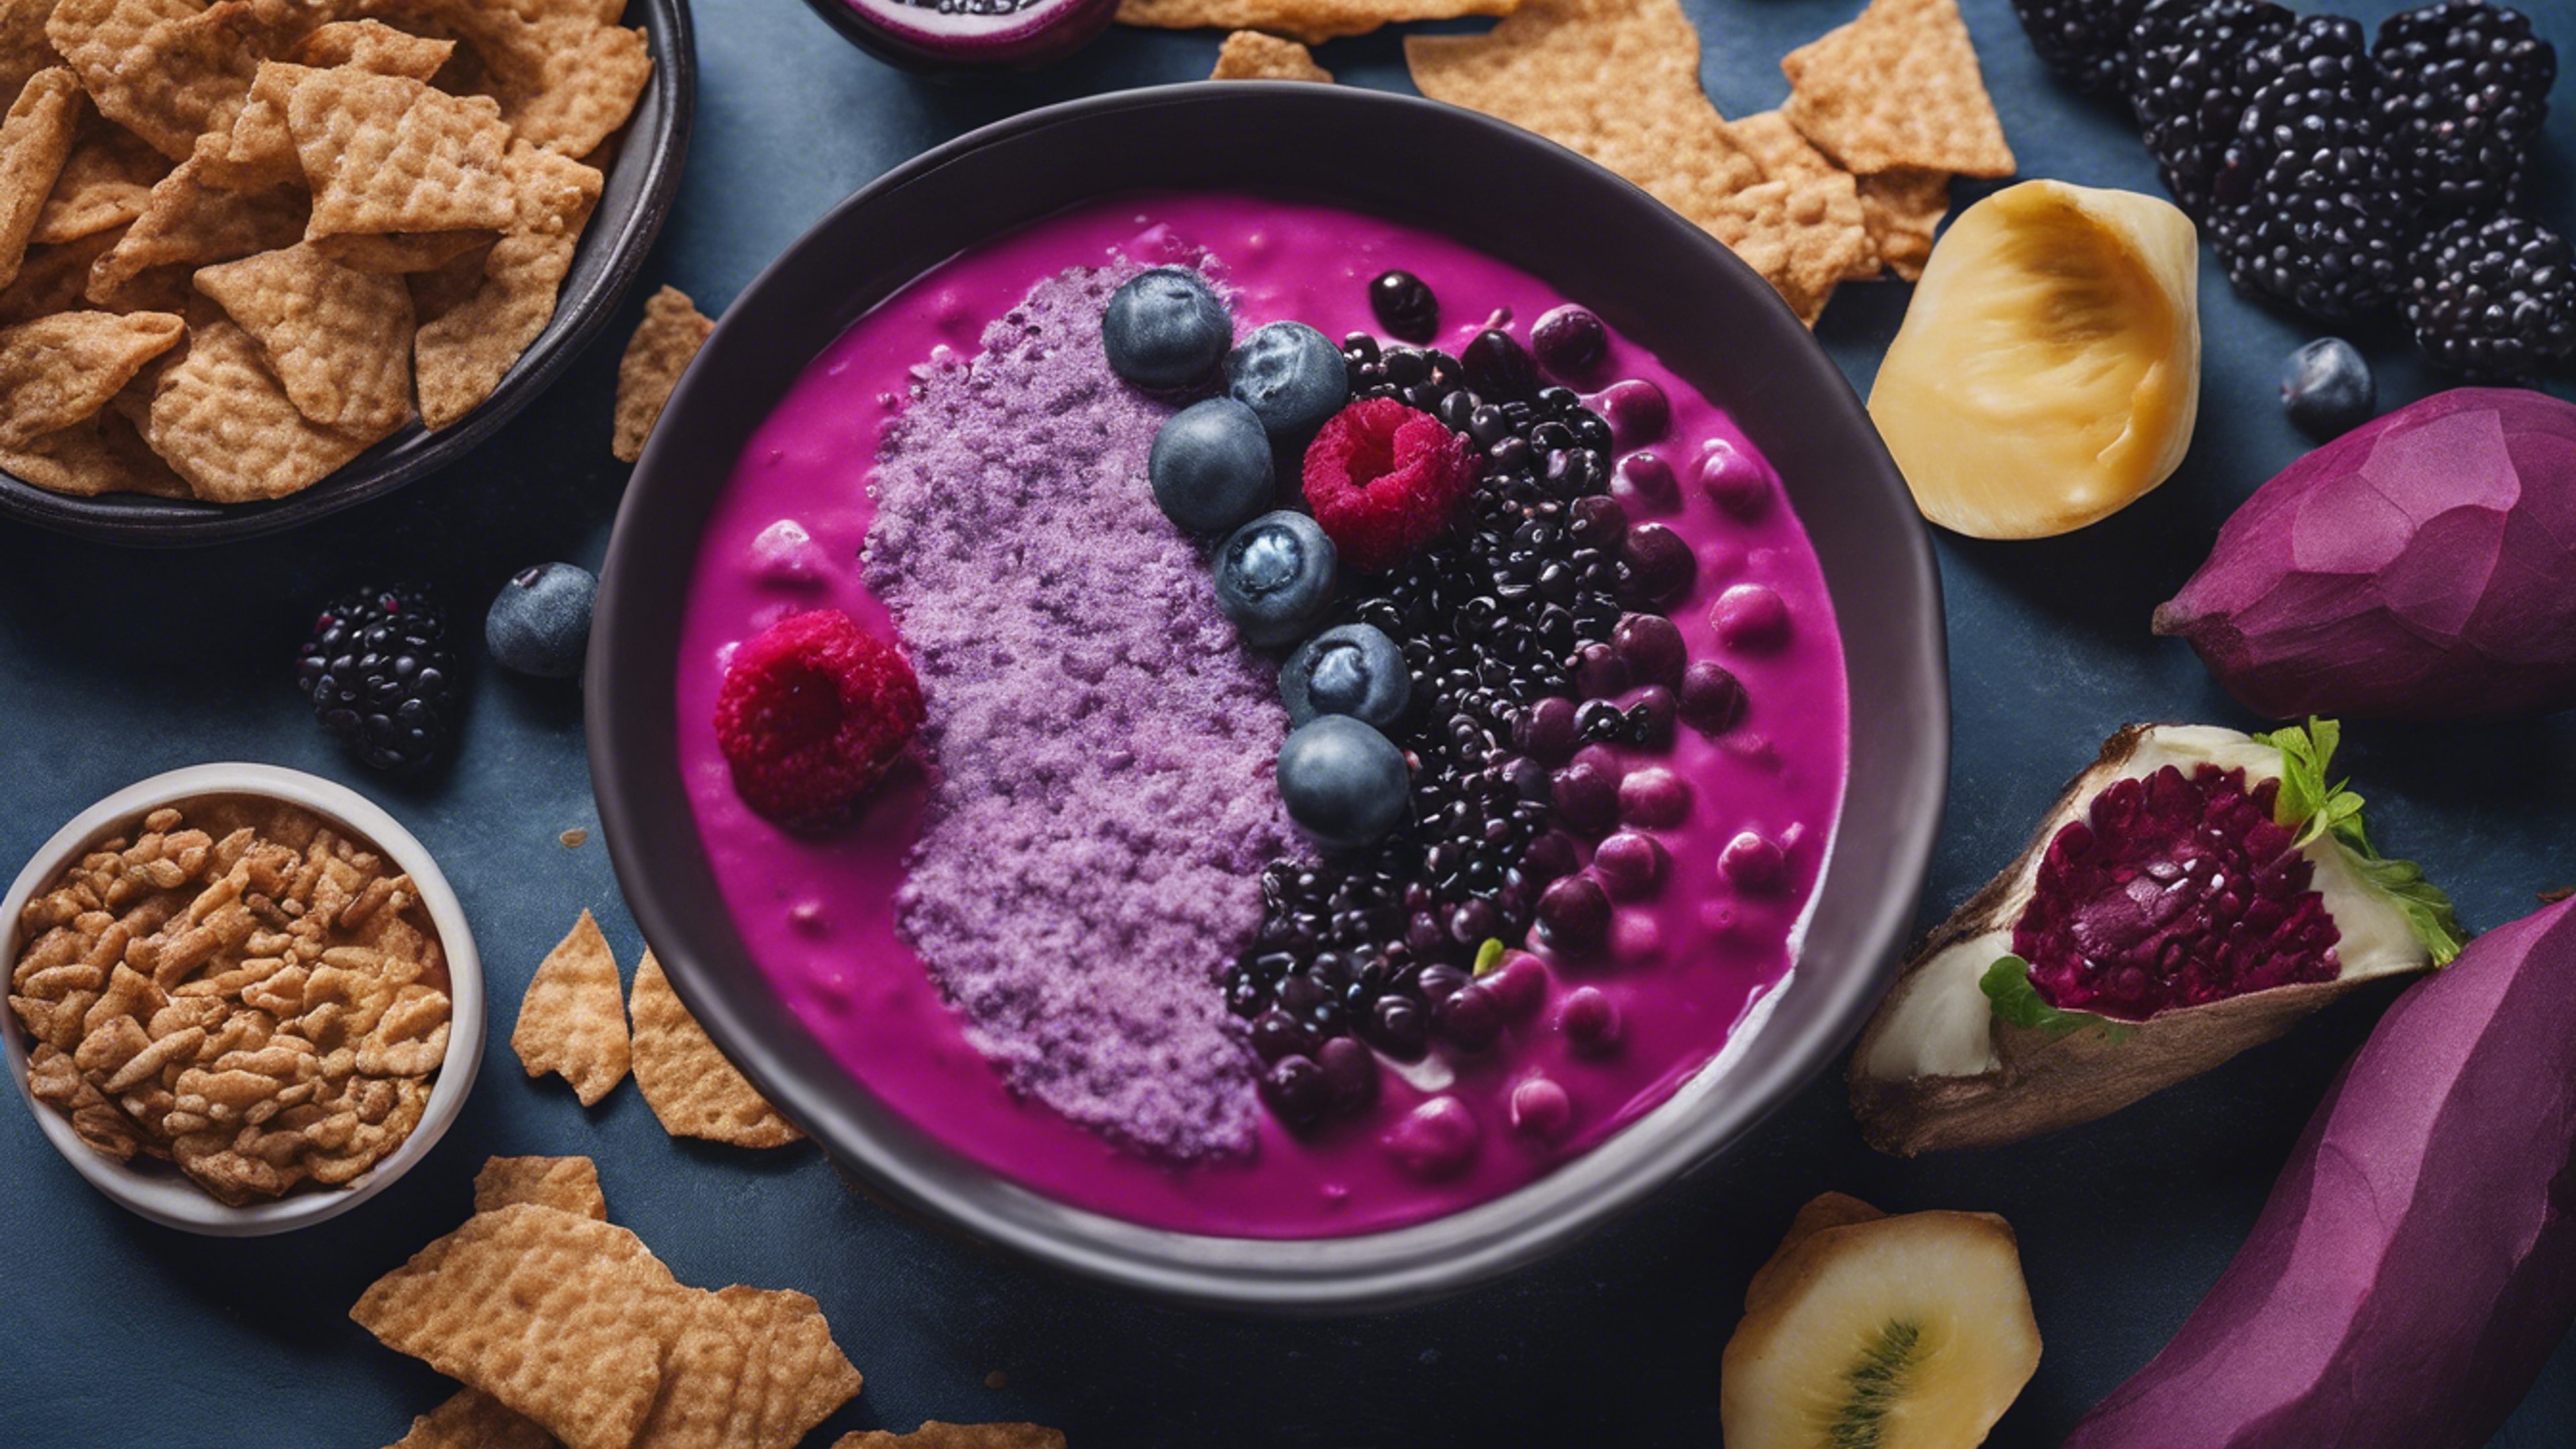 An eye-catching food collage, with purple foods like acai bowls, blue corn chips, and beetroot soup. Tapet[72264552455b47748fee]